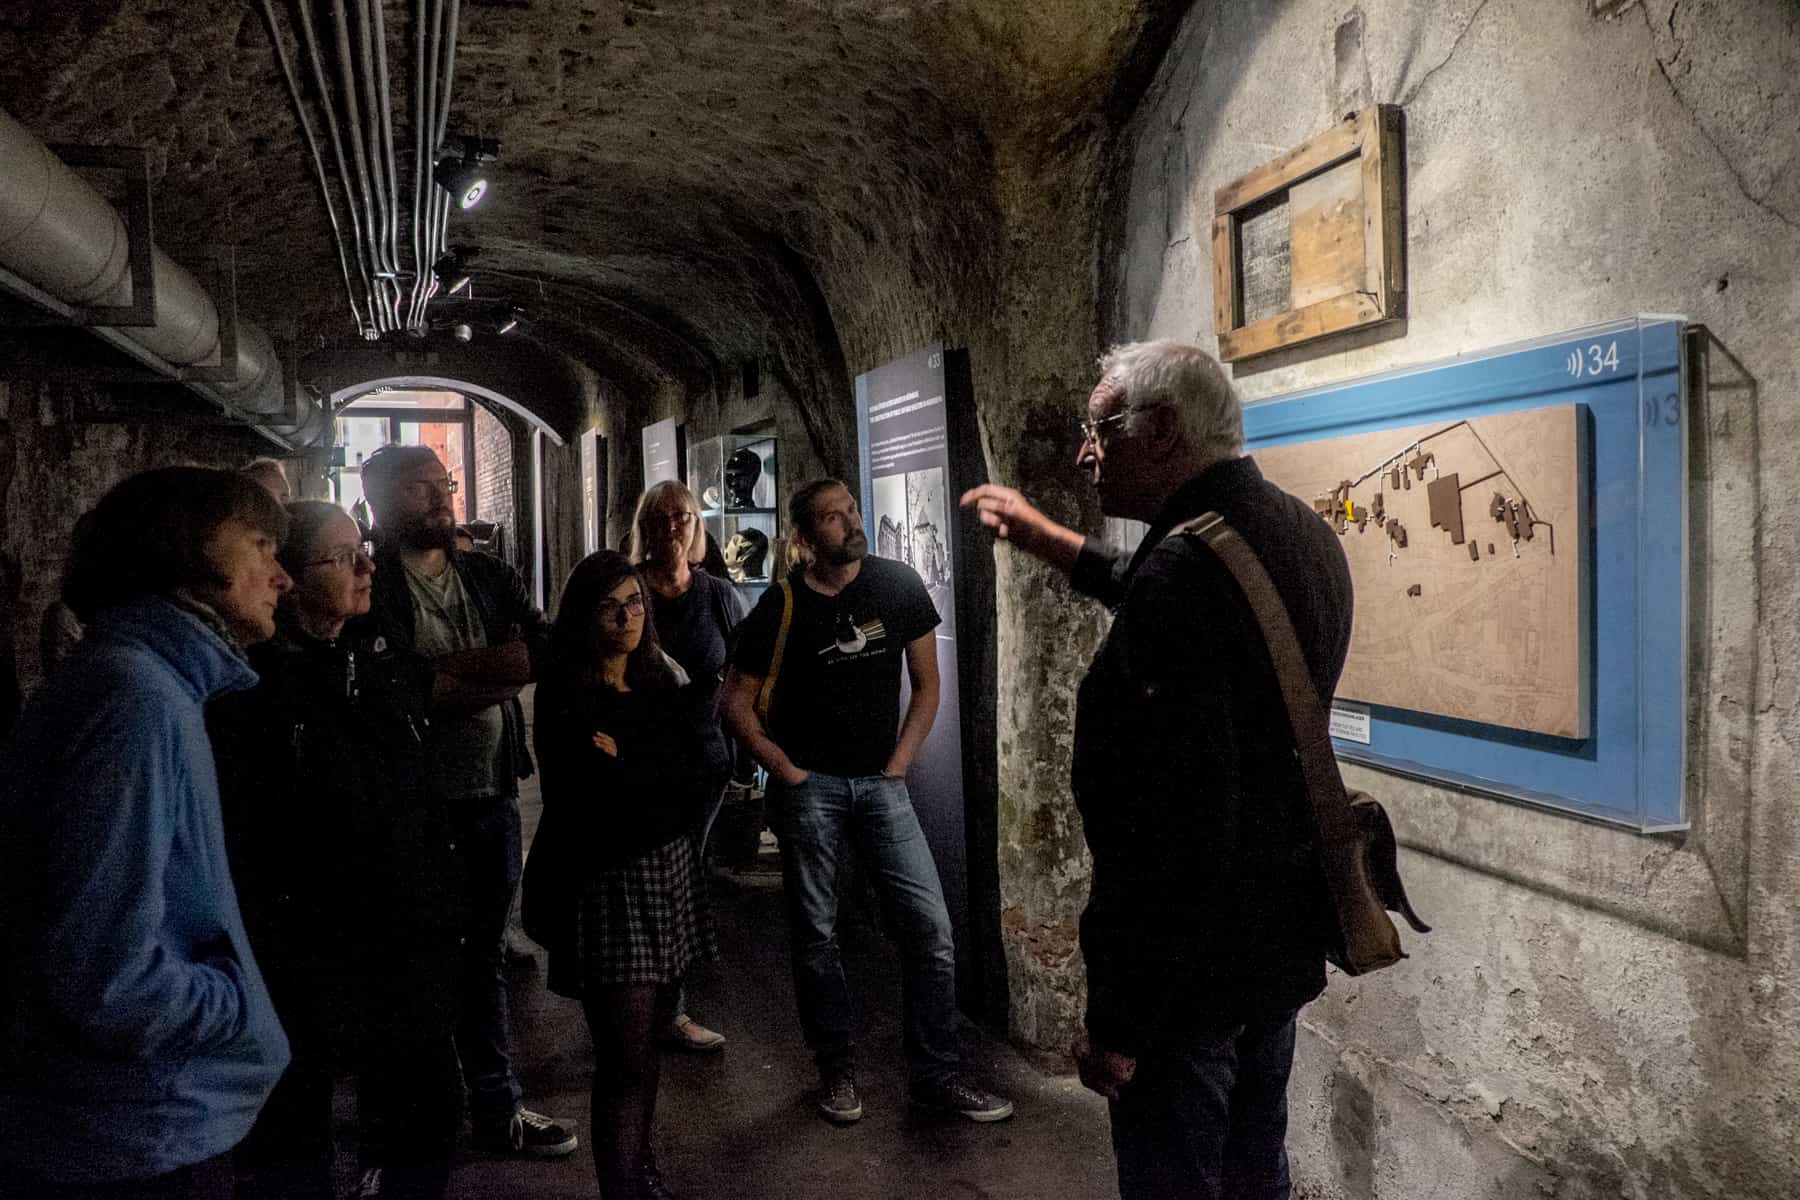 A male tour guide leads a small group in a narrow alley of the art bunker in Nuremberg, with the entrance door to the street in the background